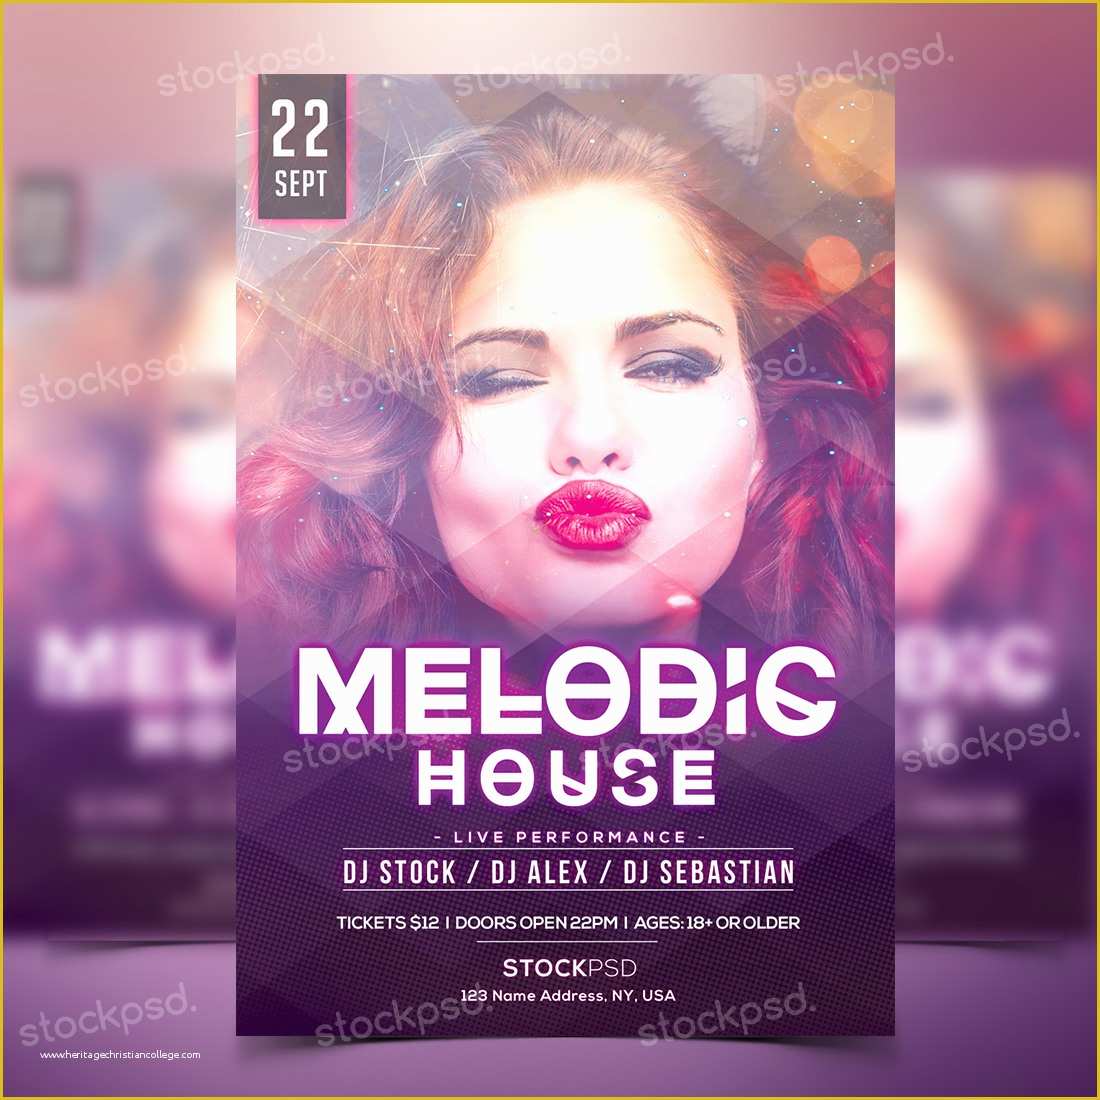 Party Flyer Template Free Of Melodic House Free Party Psd Flyer Template Stockpsd